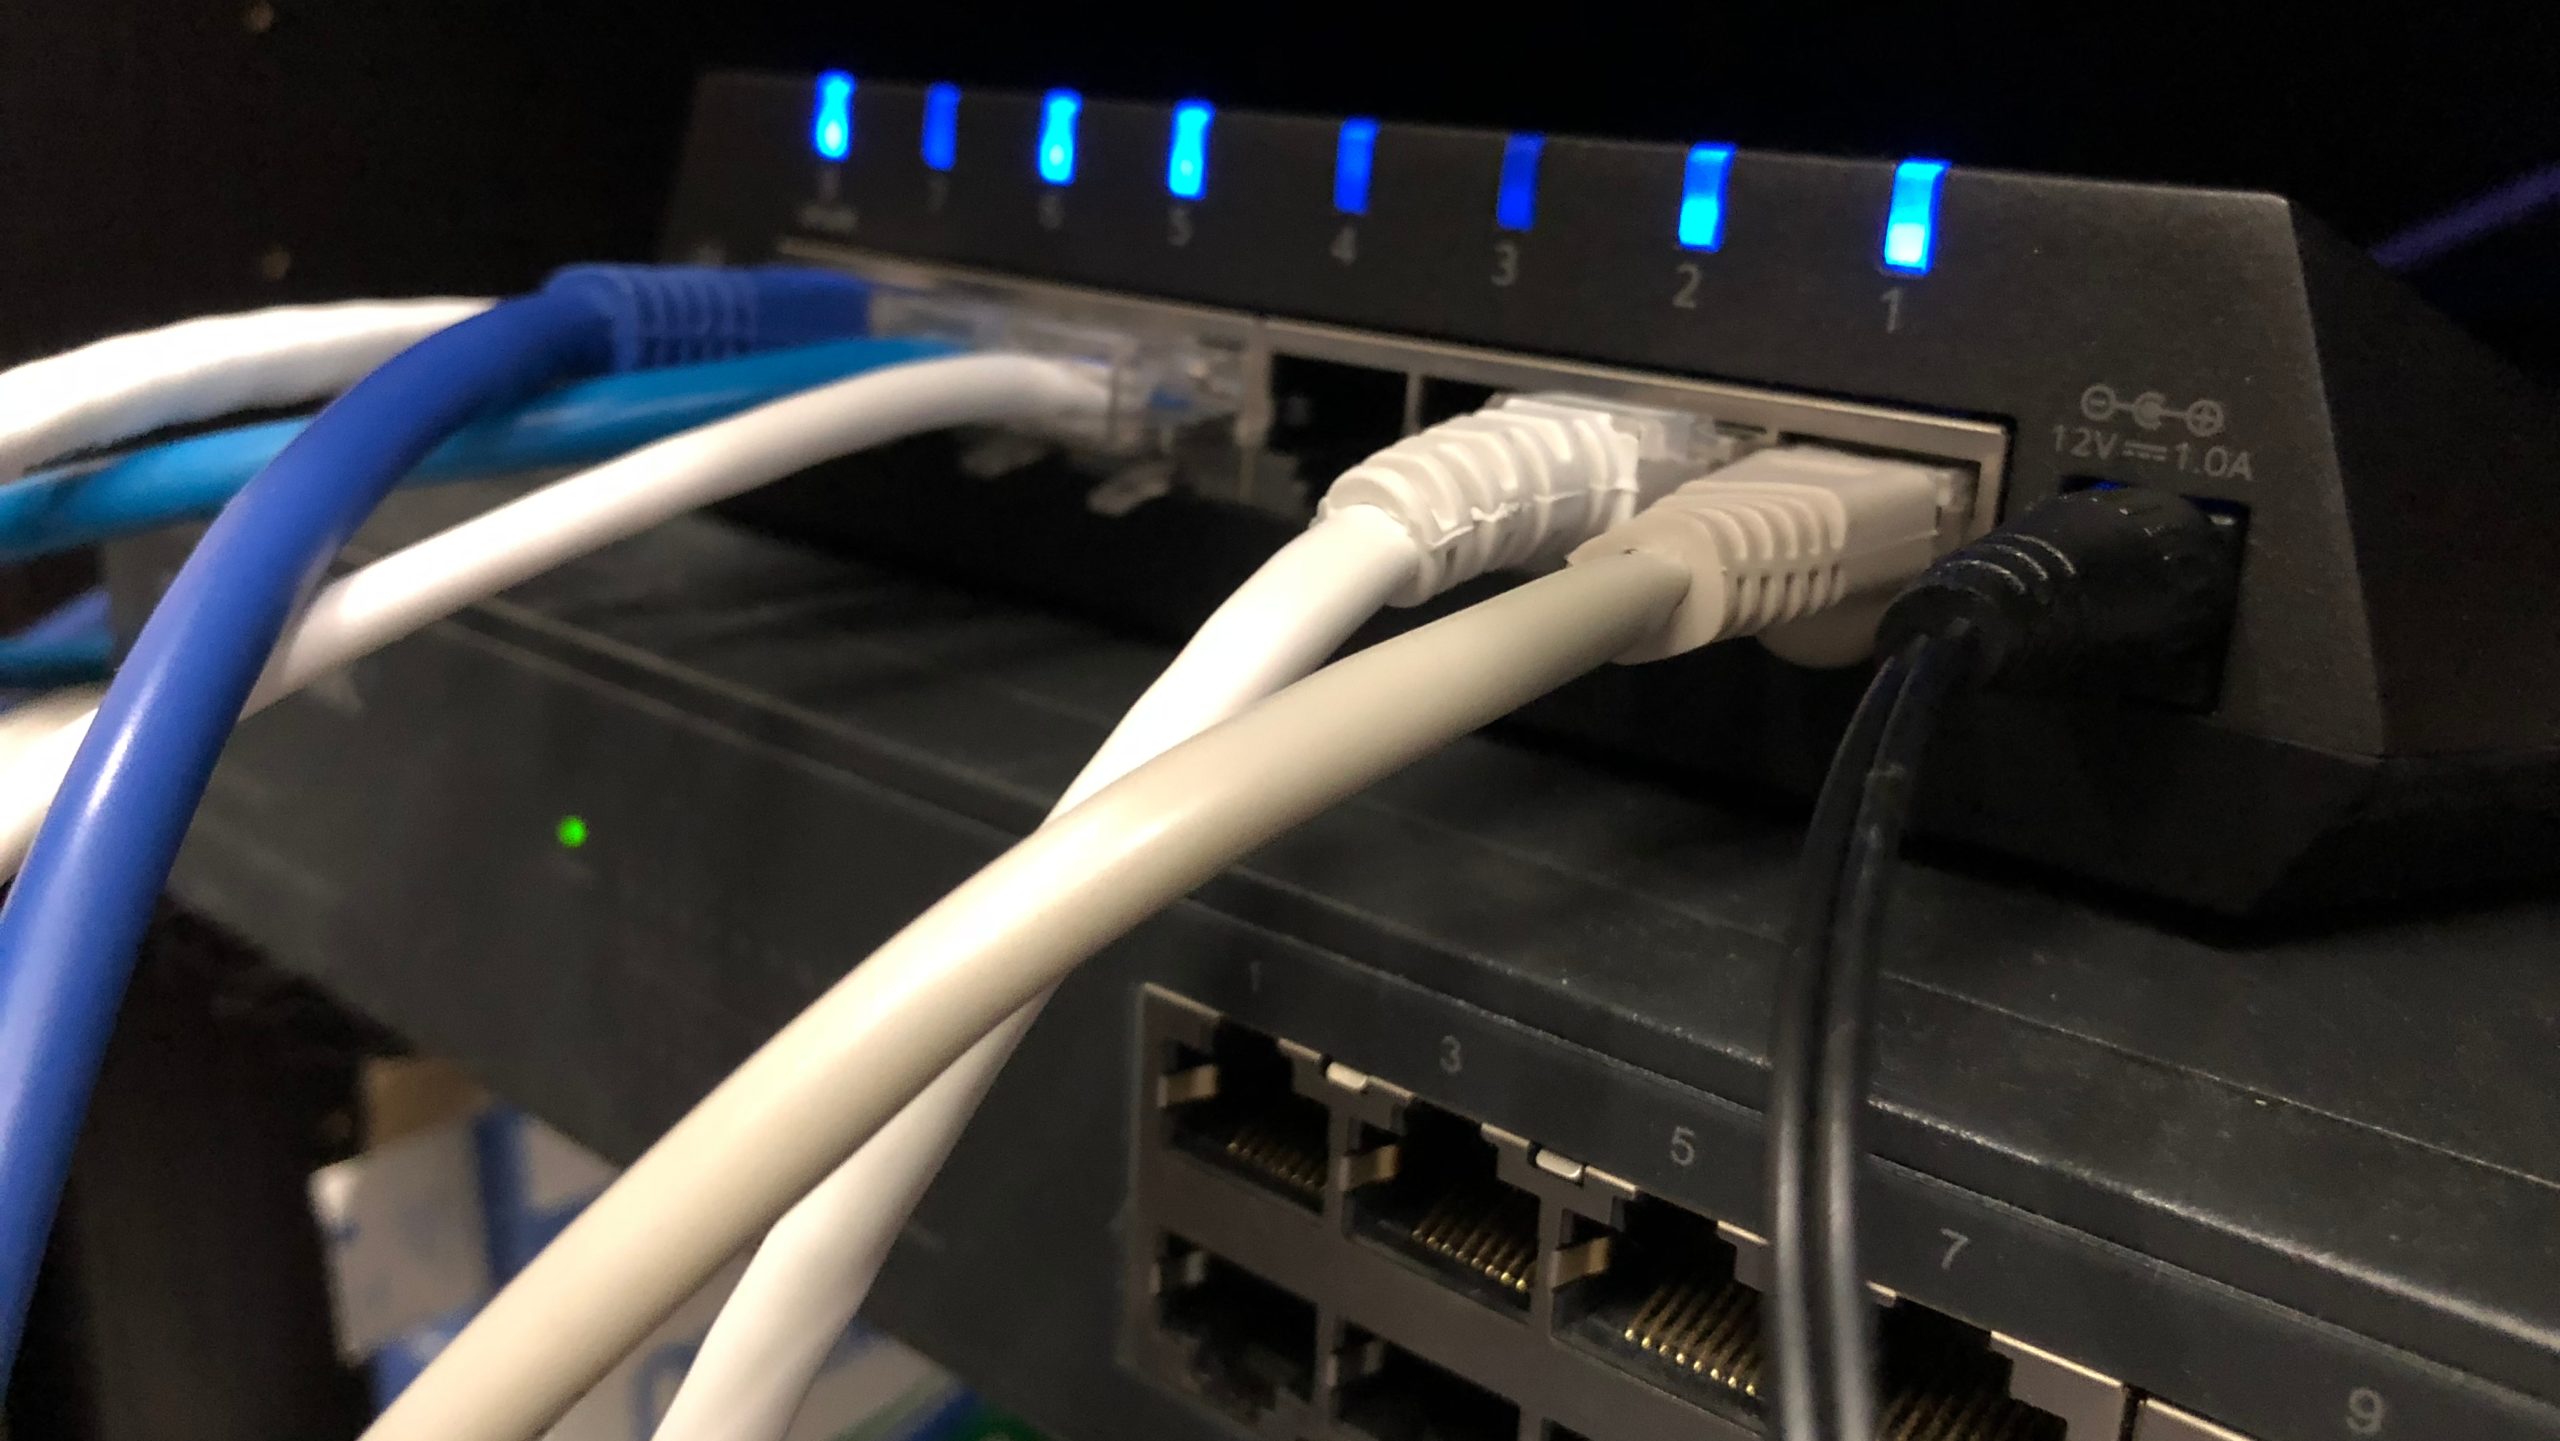 difference between the Gigabit switch and Ethernet switch